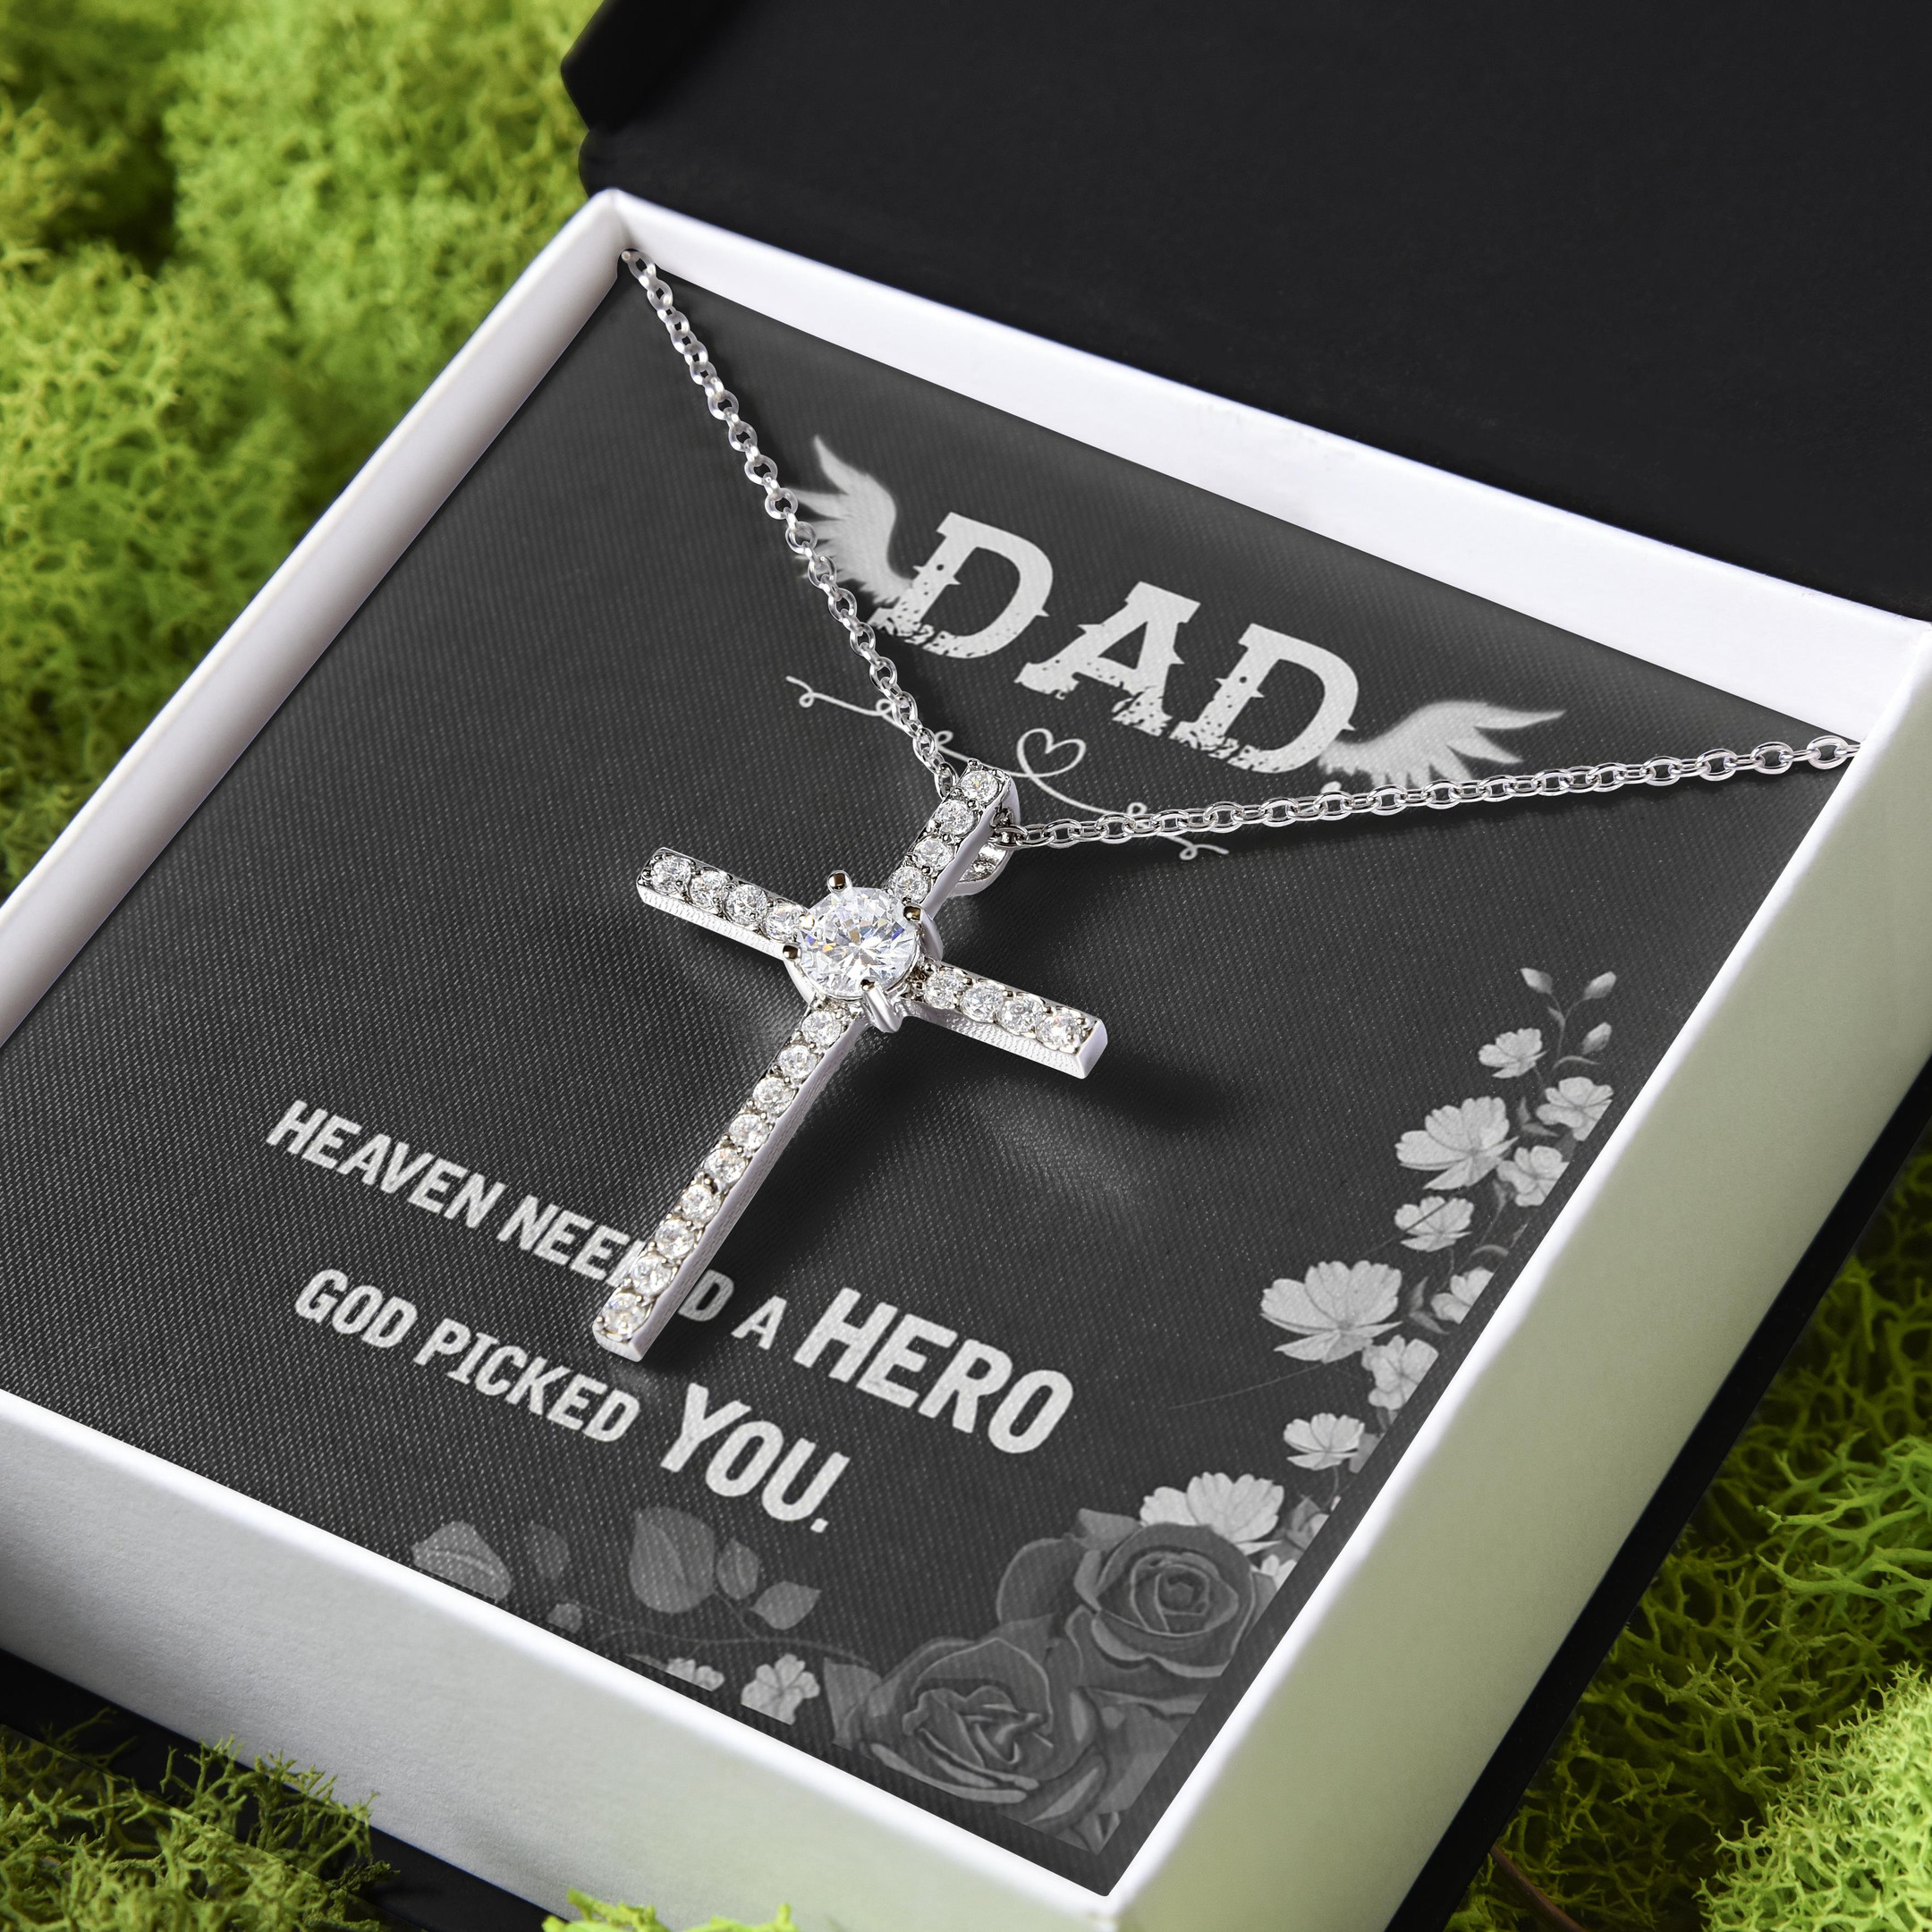 Gift For Dad Heaven Needed A Hero God Picked You For Angel Dad CZ Cross Necklace